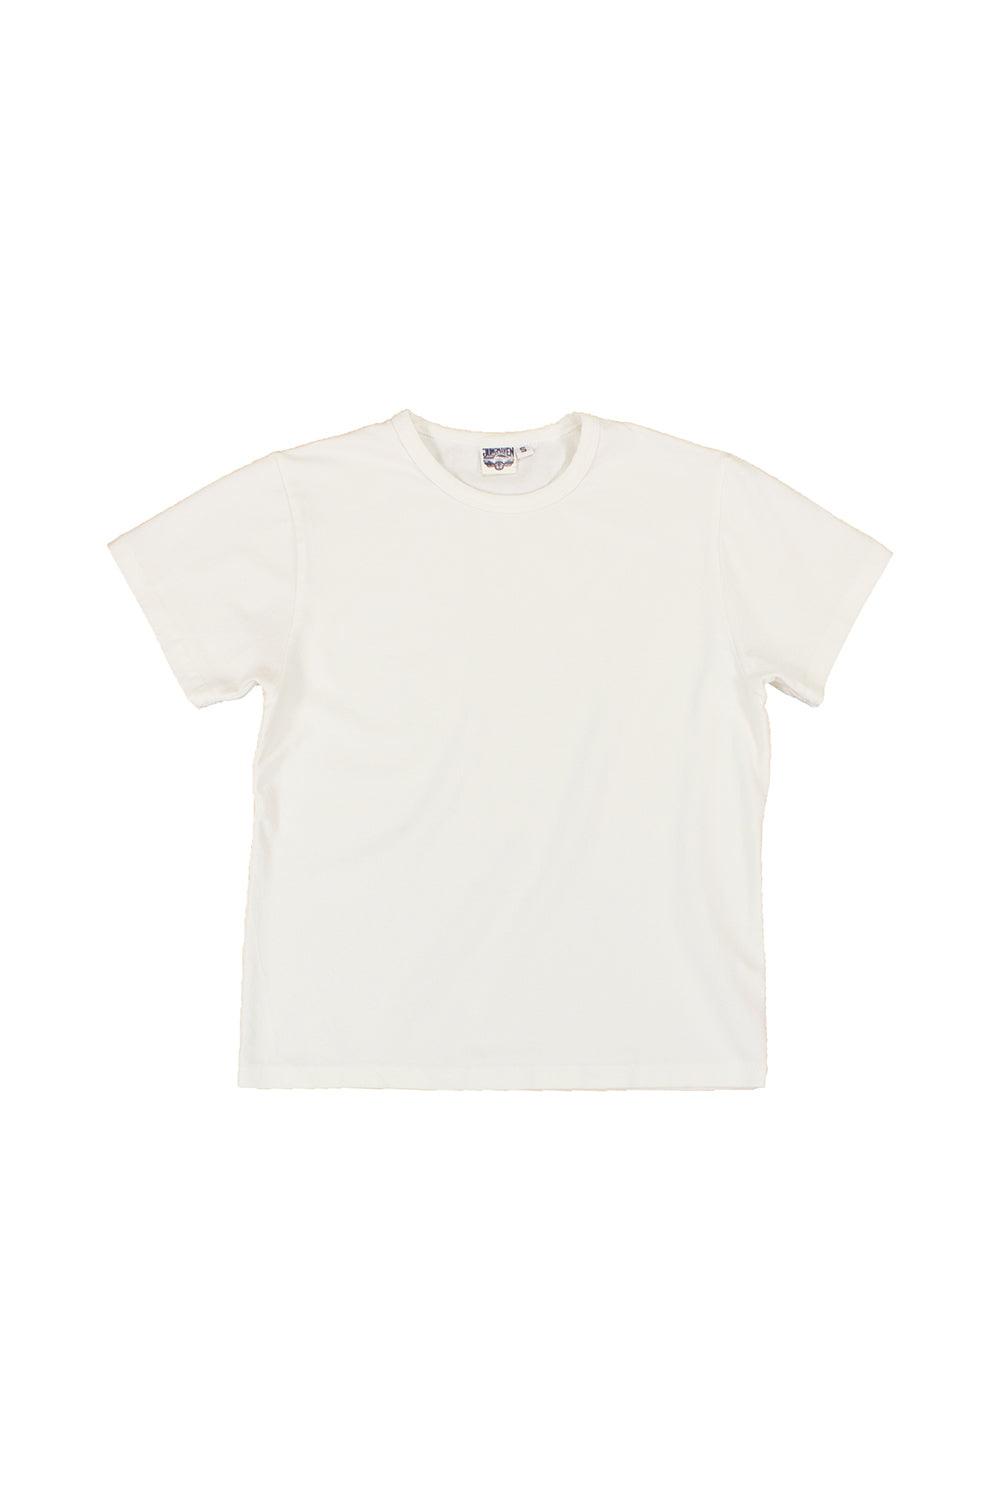 Jugmaven hemp and cotton blend tiny tee crop top. Sustainably made.